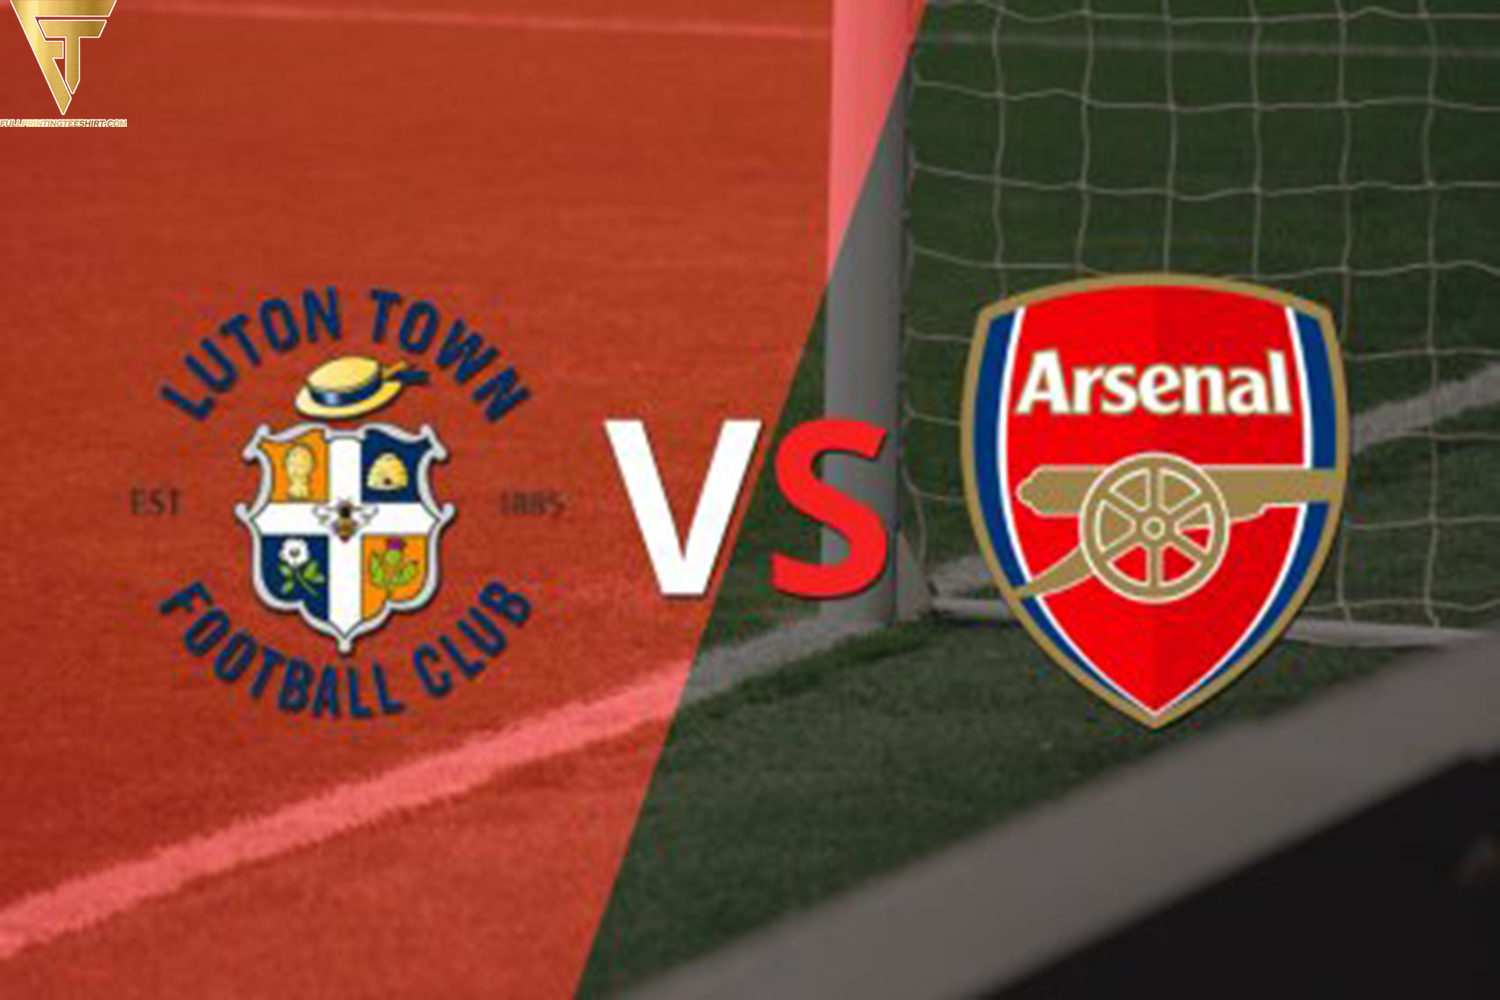 Arsenal vs. Luton Town Key Players, Tactics, and the Race for Premier League Glory